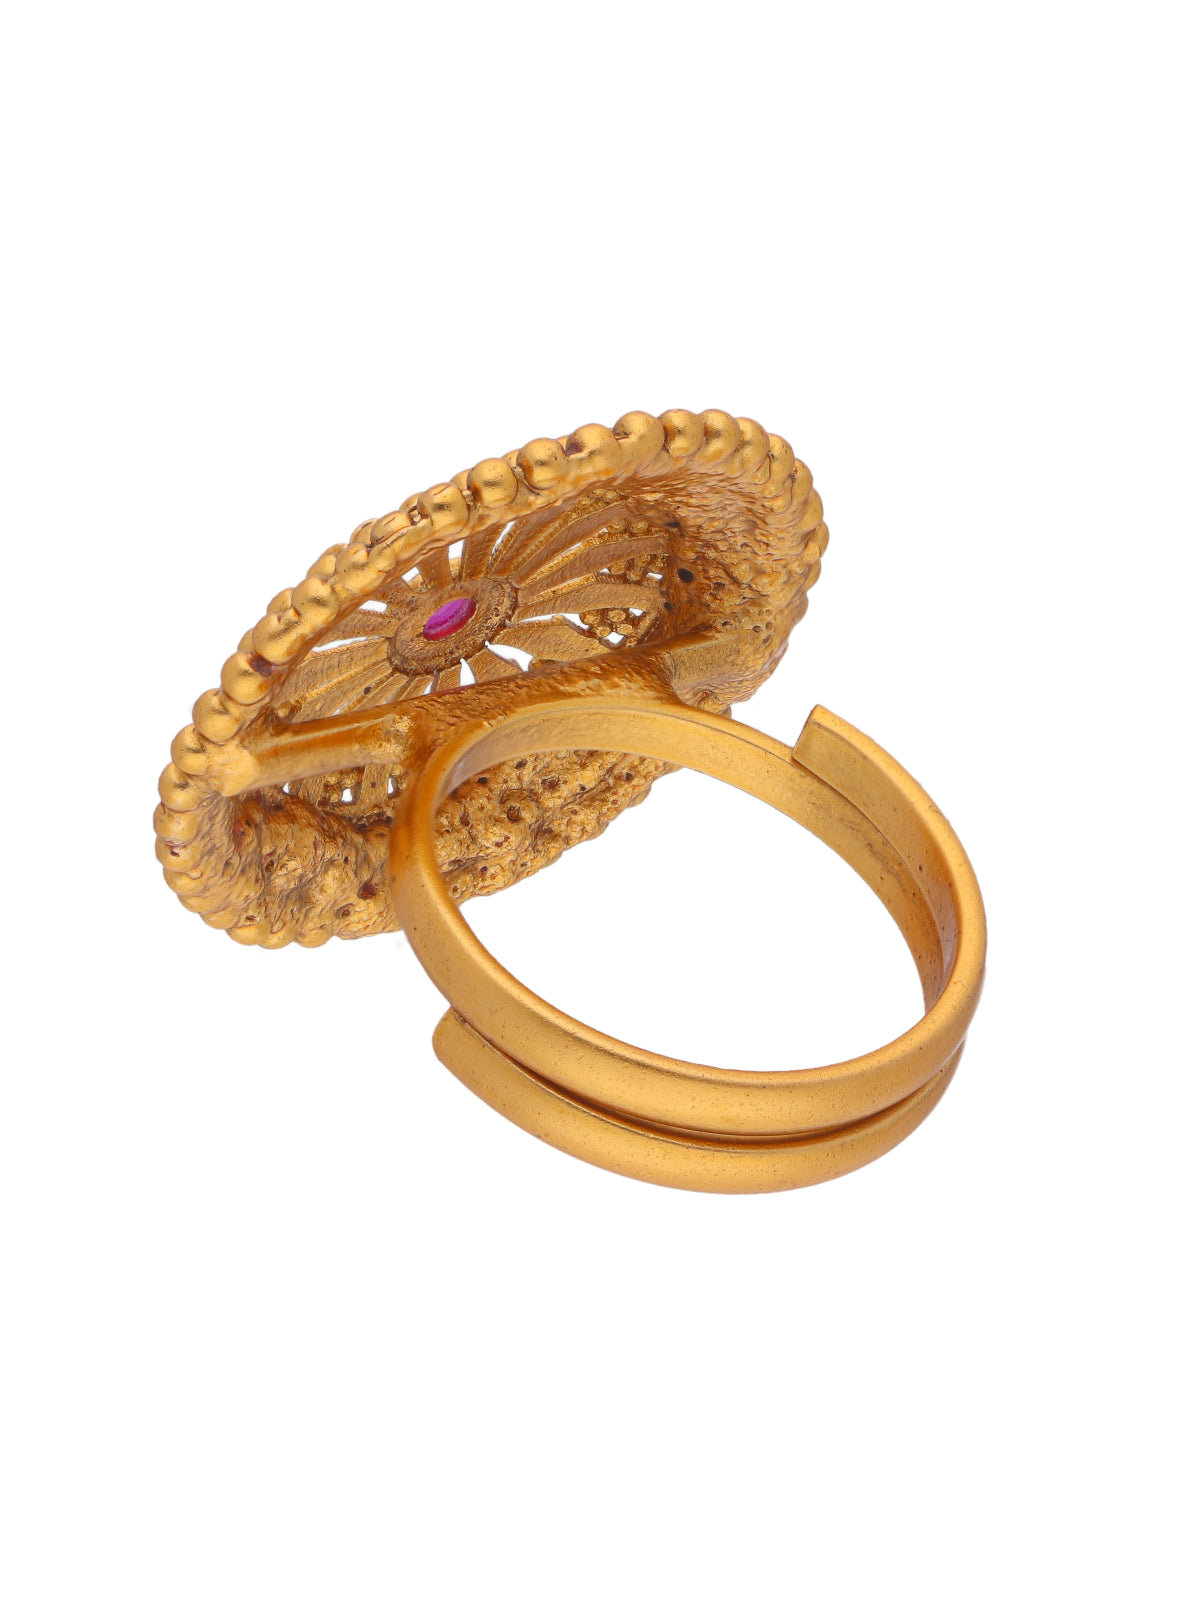 Buy original Gold Rings For Men Under 5,000 Rupees from top Brands Online  at Tata CLiQ